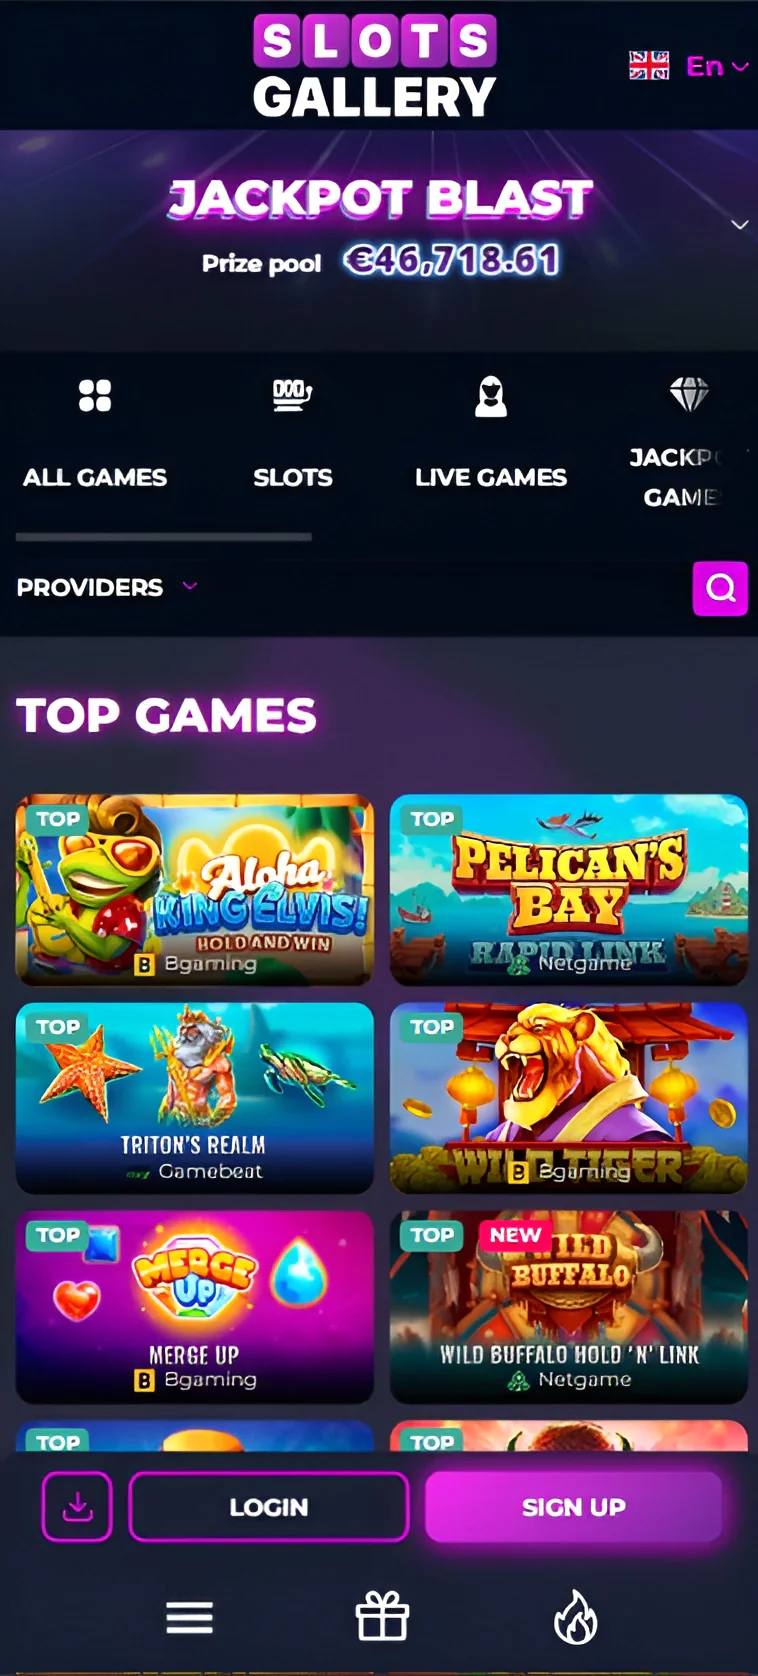 Slot Selection in the Mobile App - Slots Gallery Canada